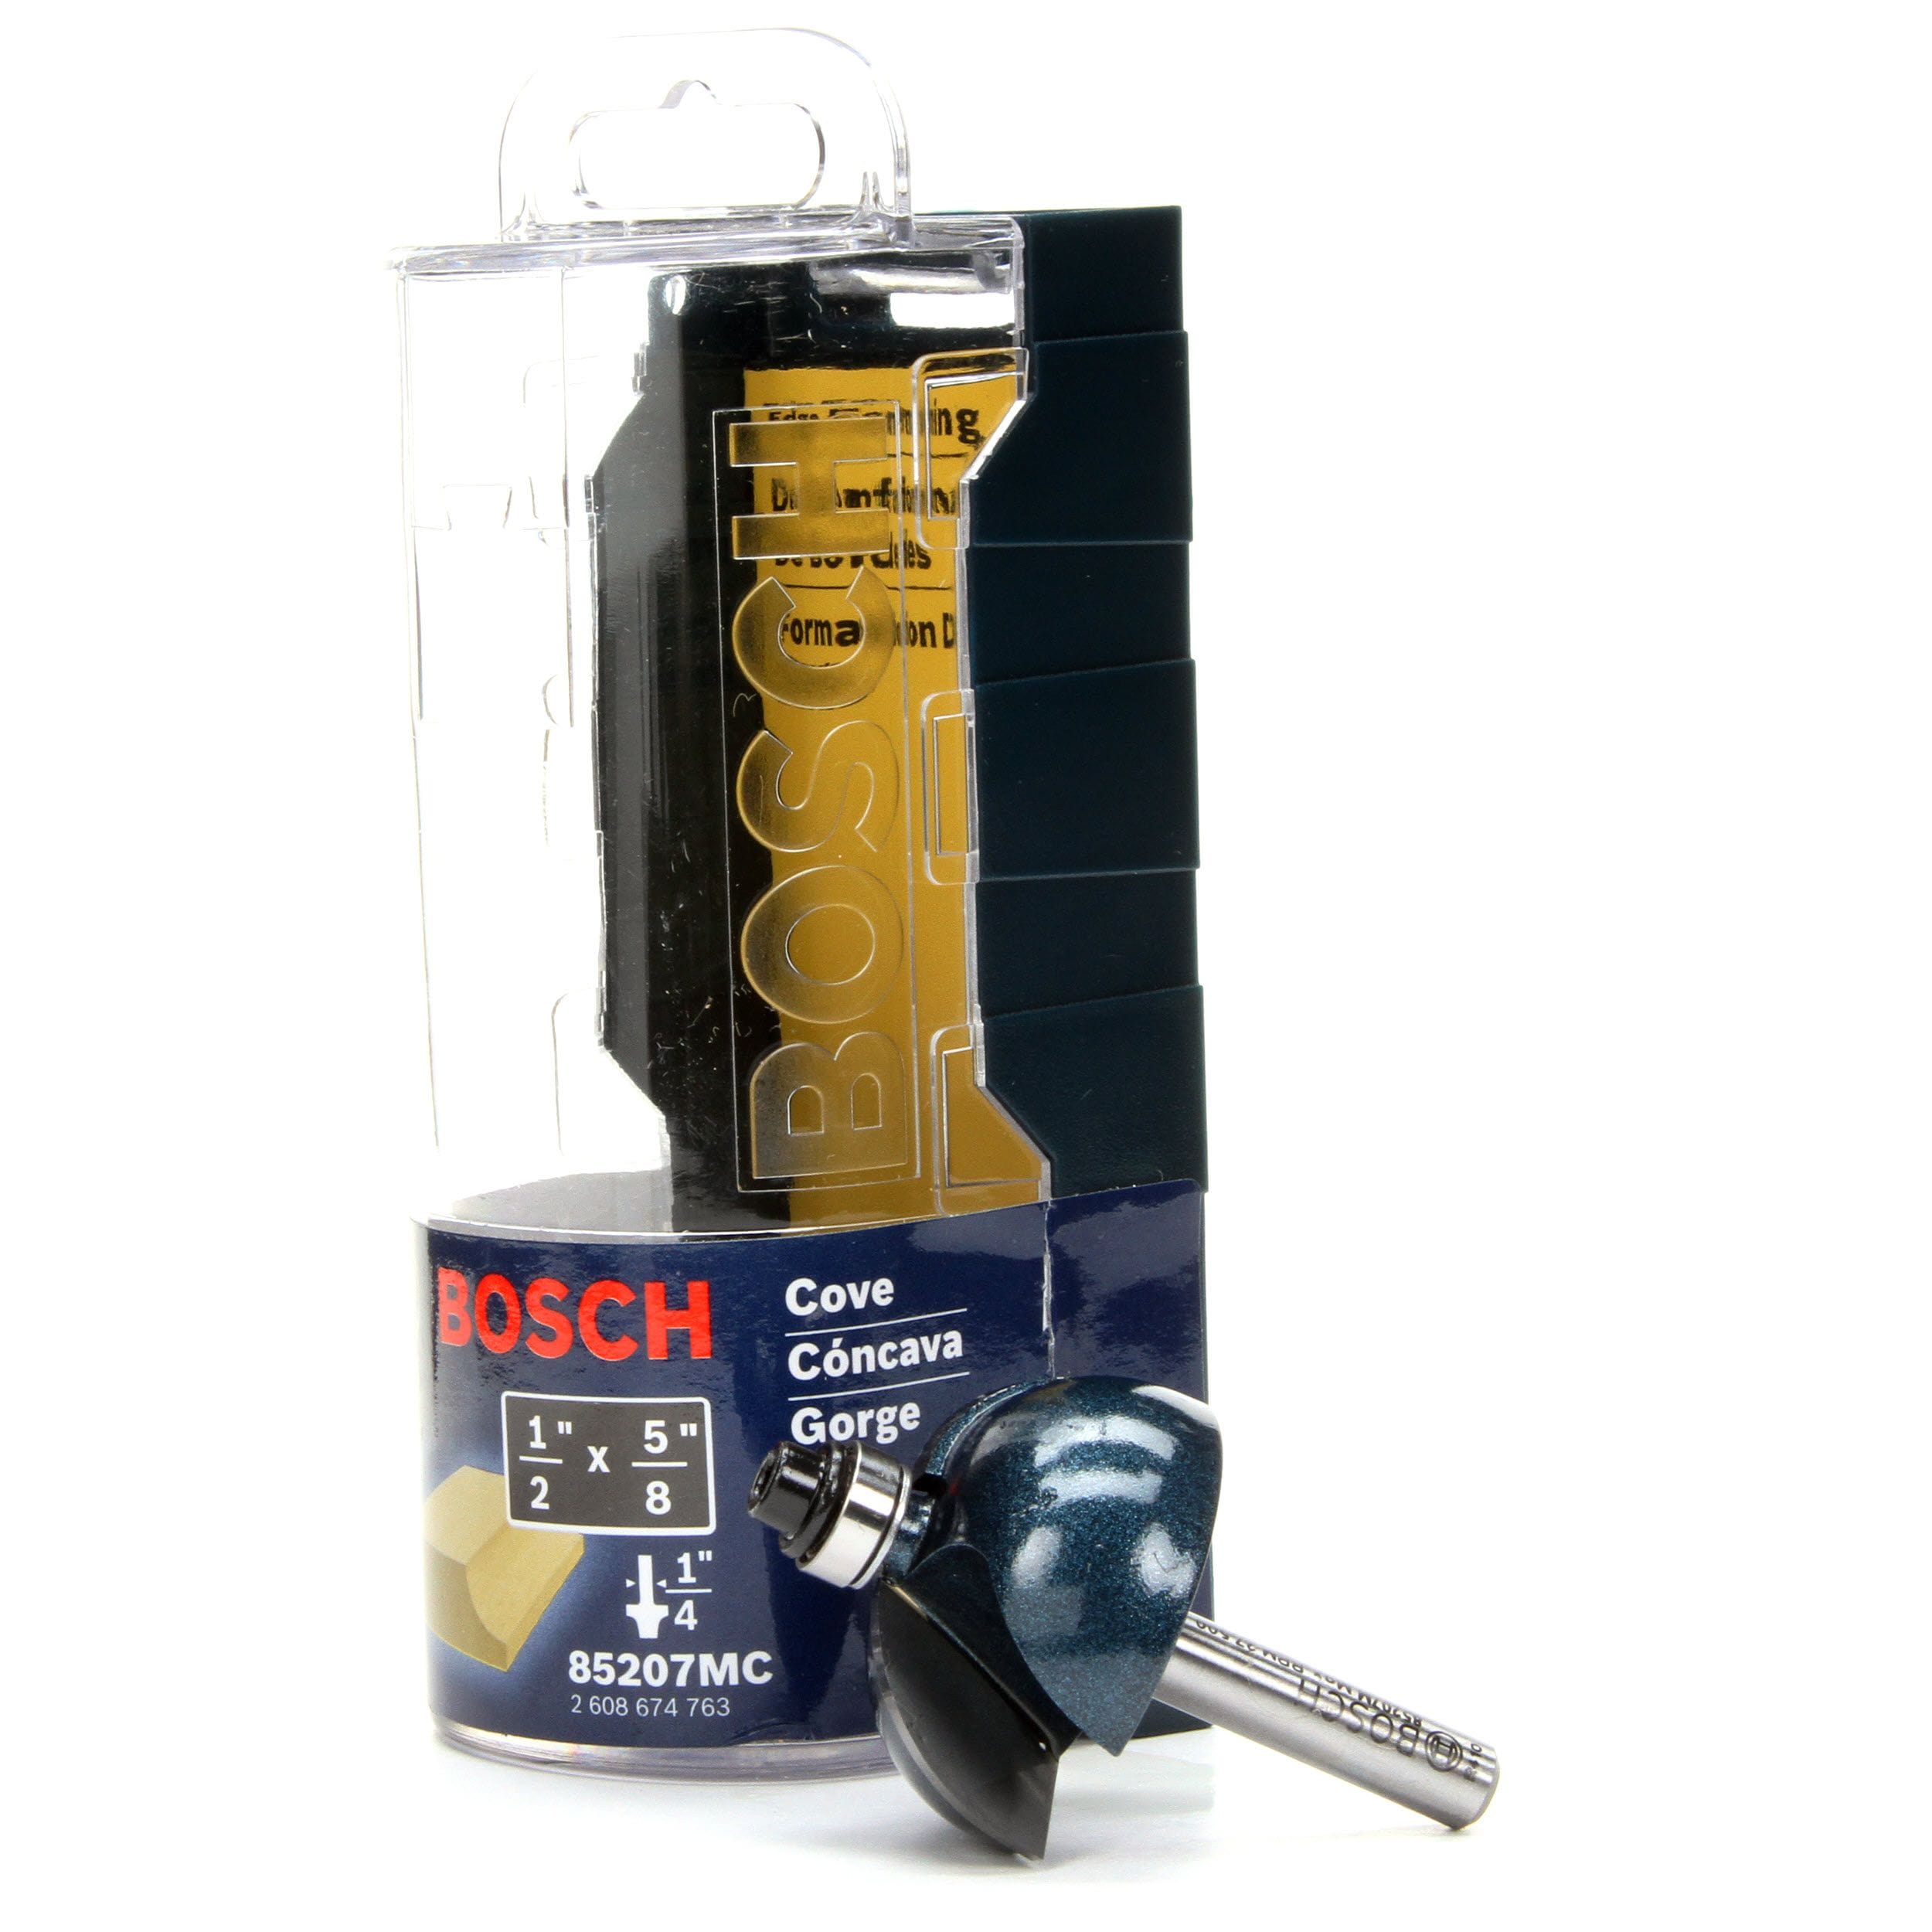 Bosch 1-1/4-in Carbide-tipped Classical Router Bit in the Surface 